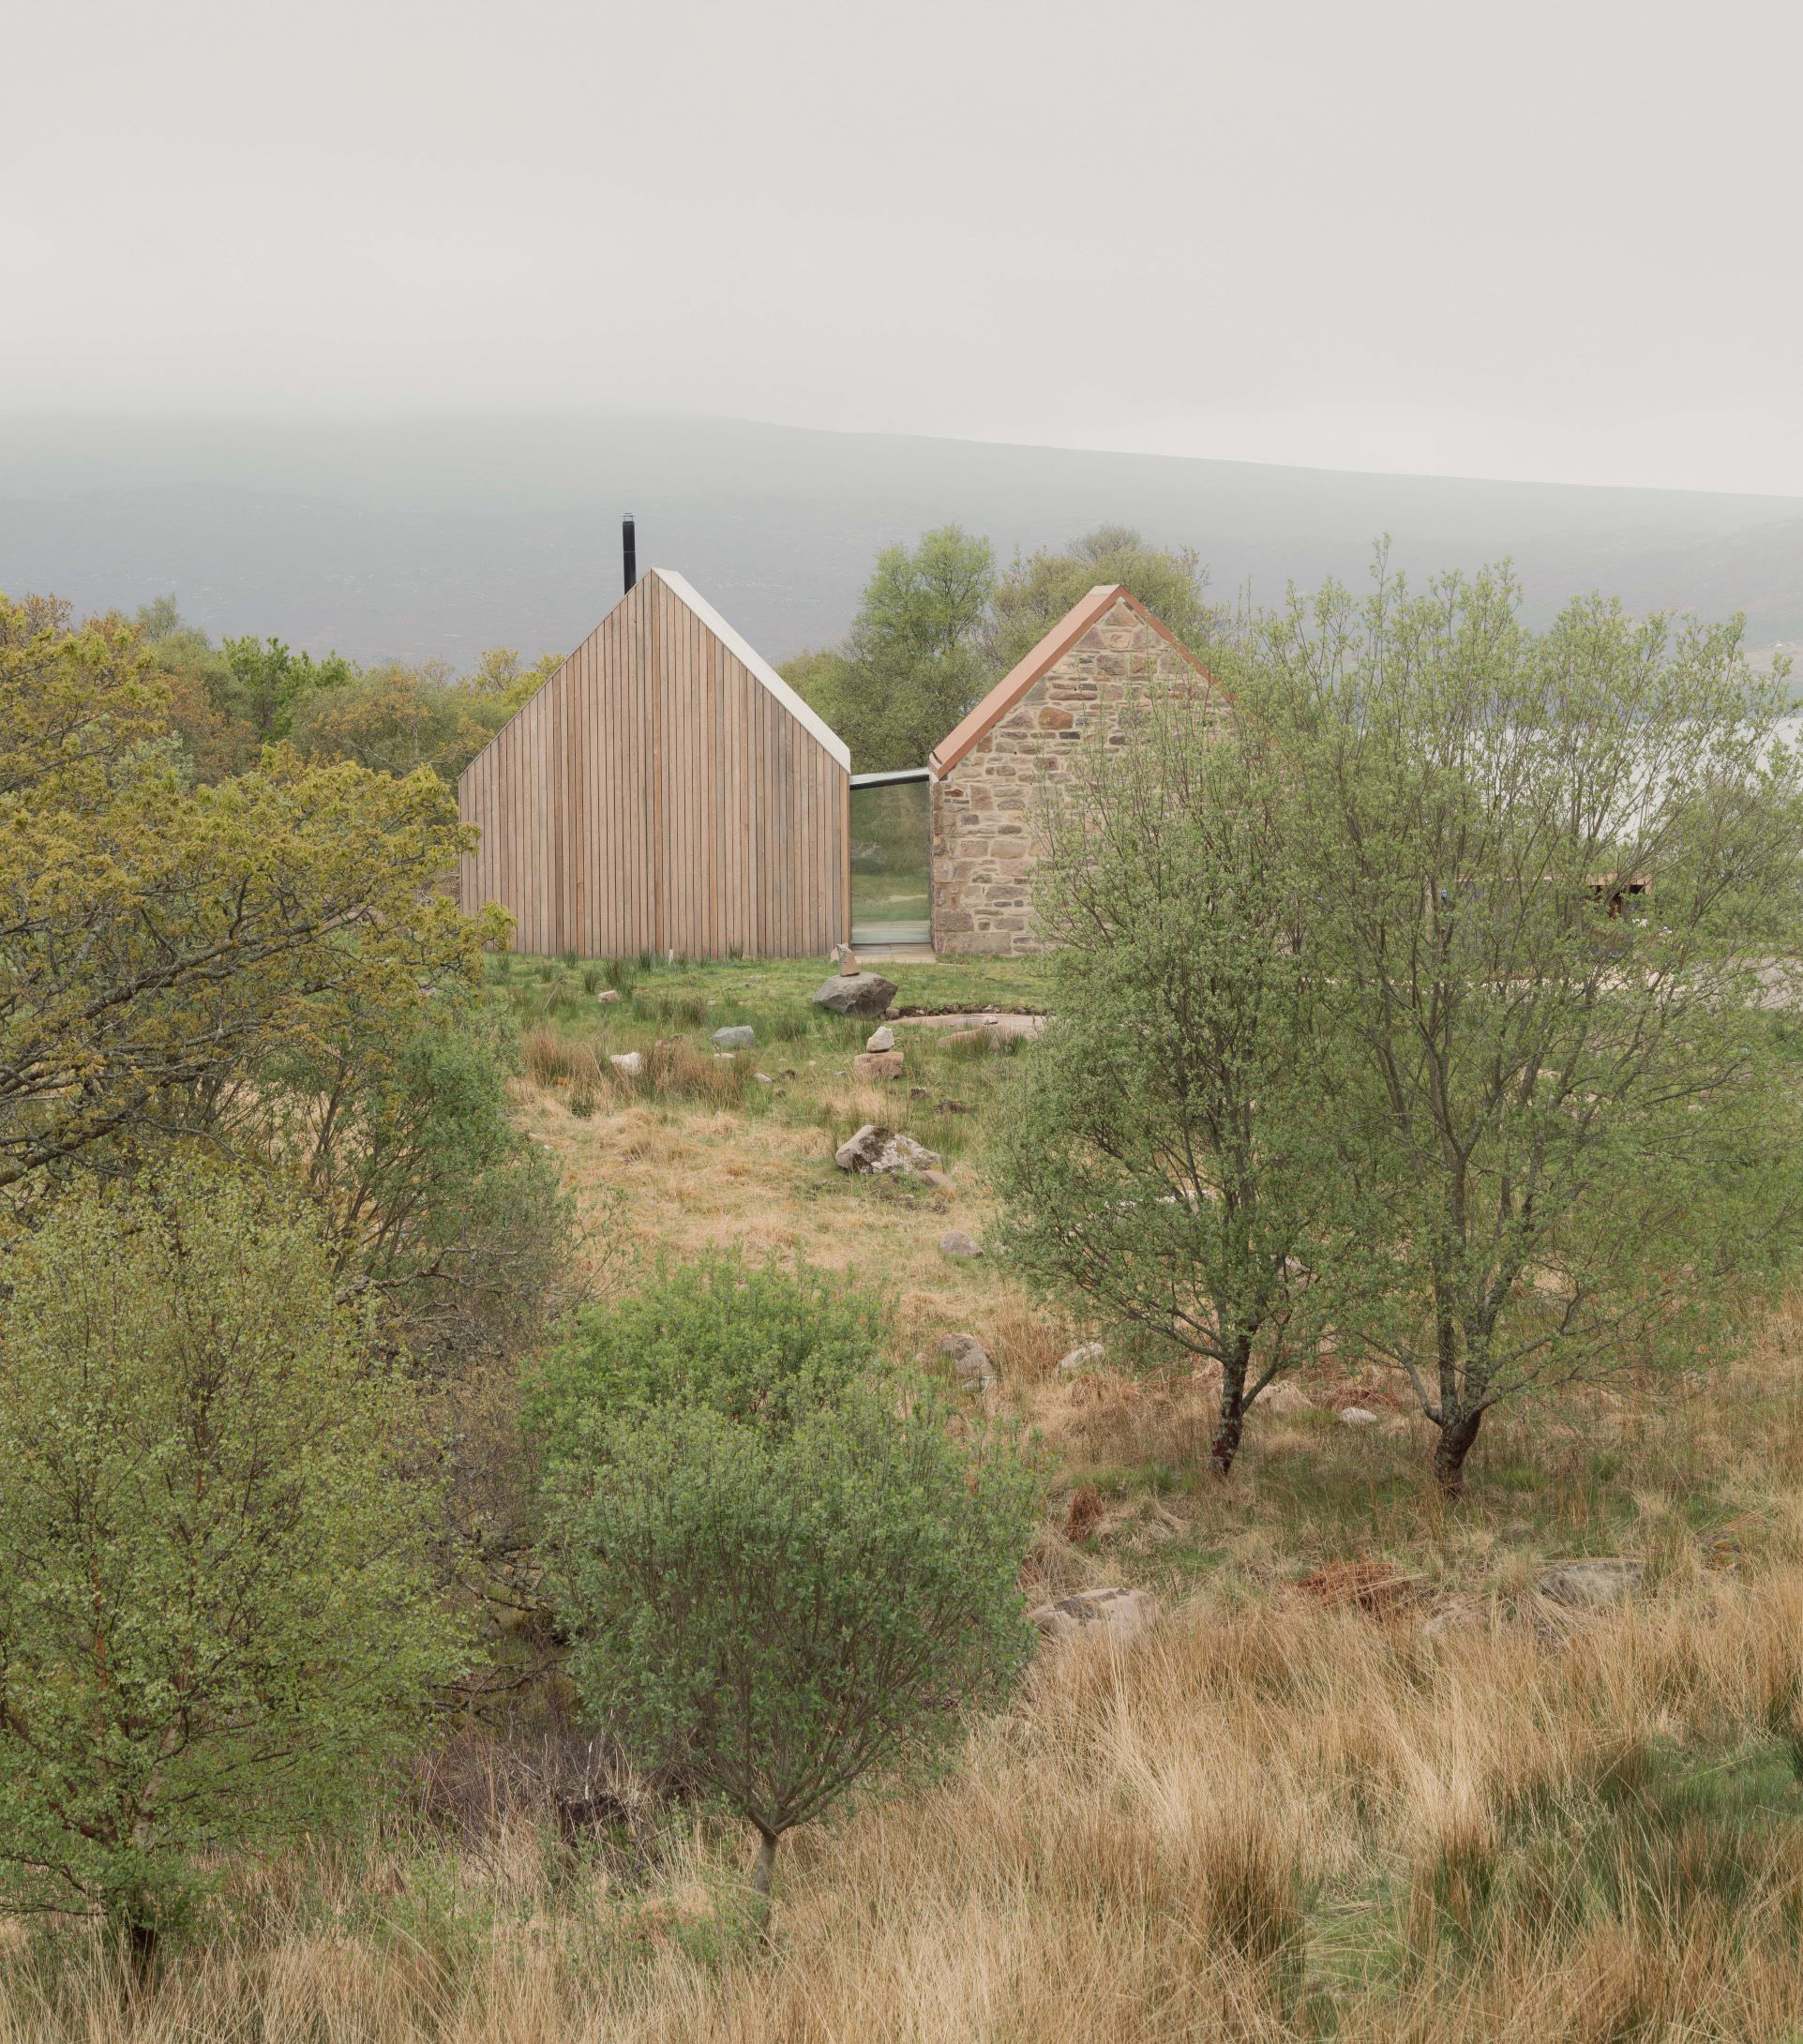 Wester Ross house wins best new building award at Highlands and Islands Architecture Awards